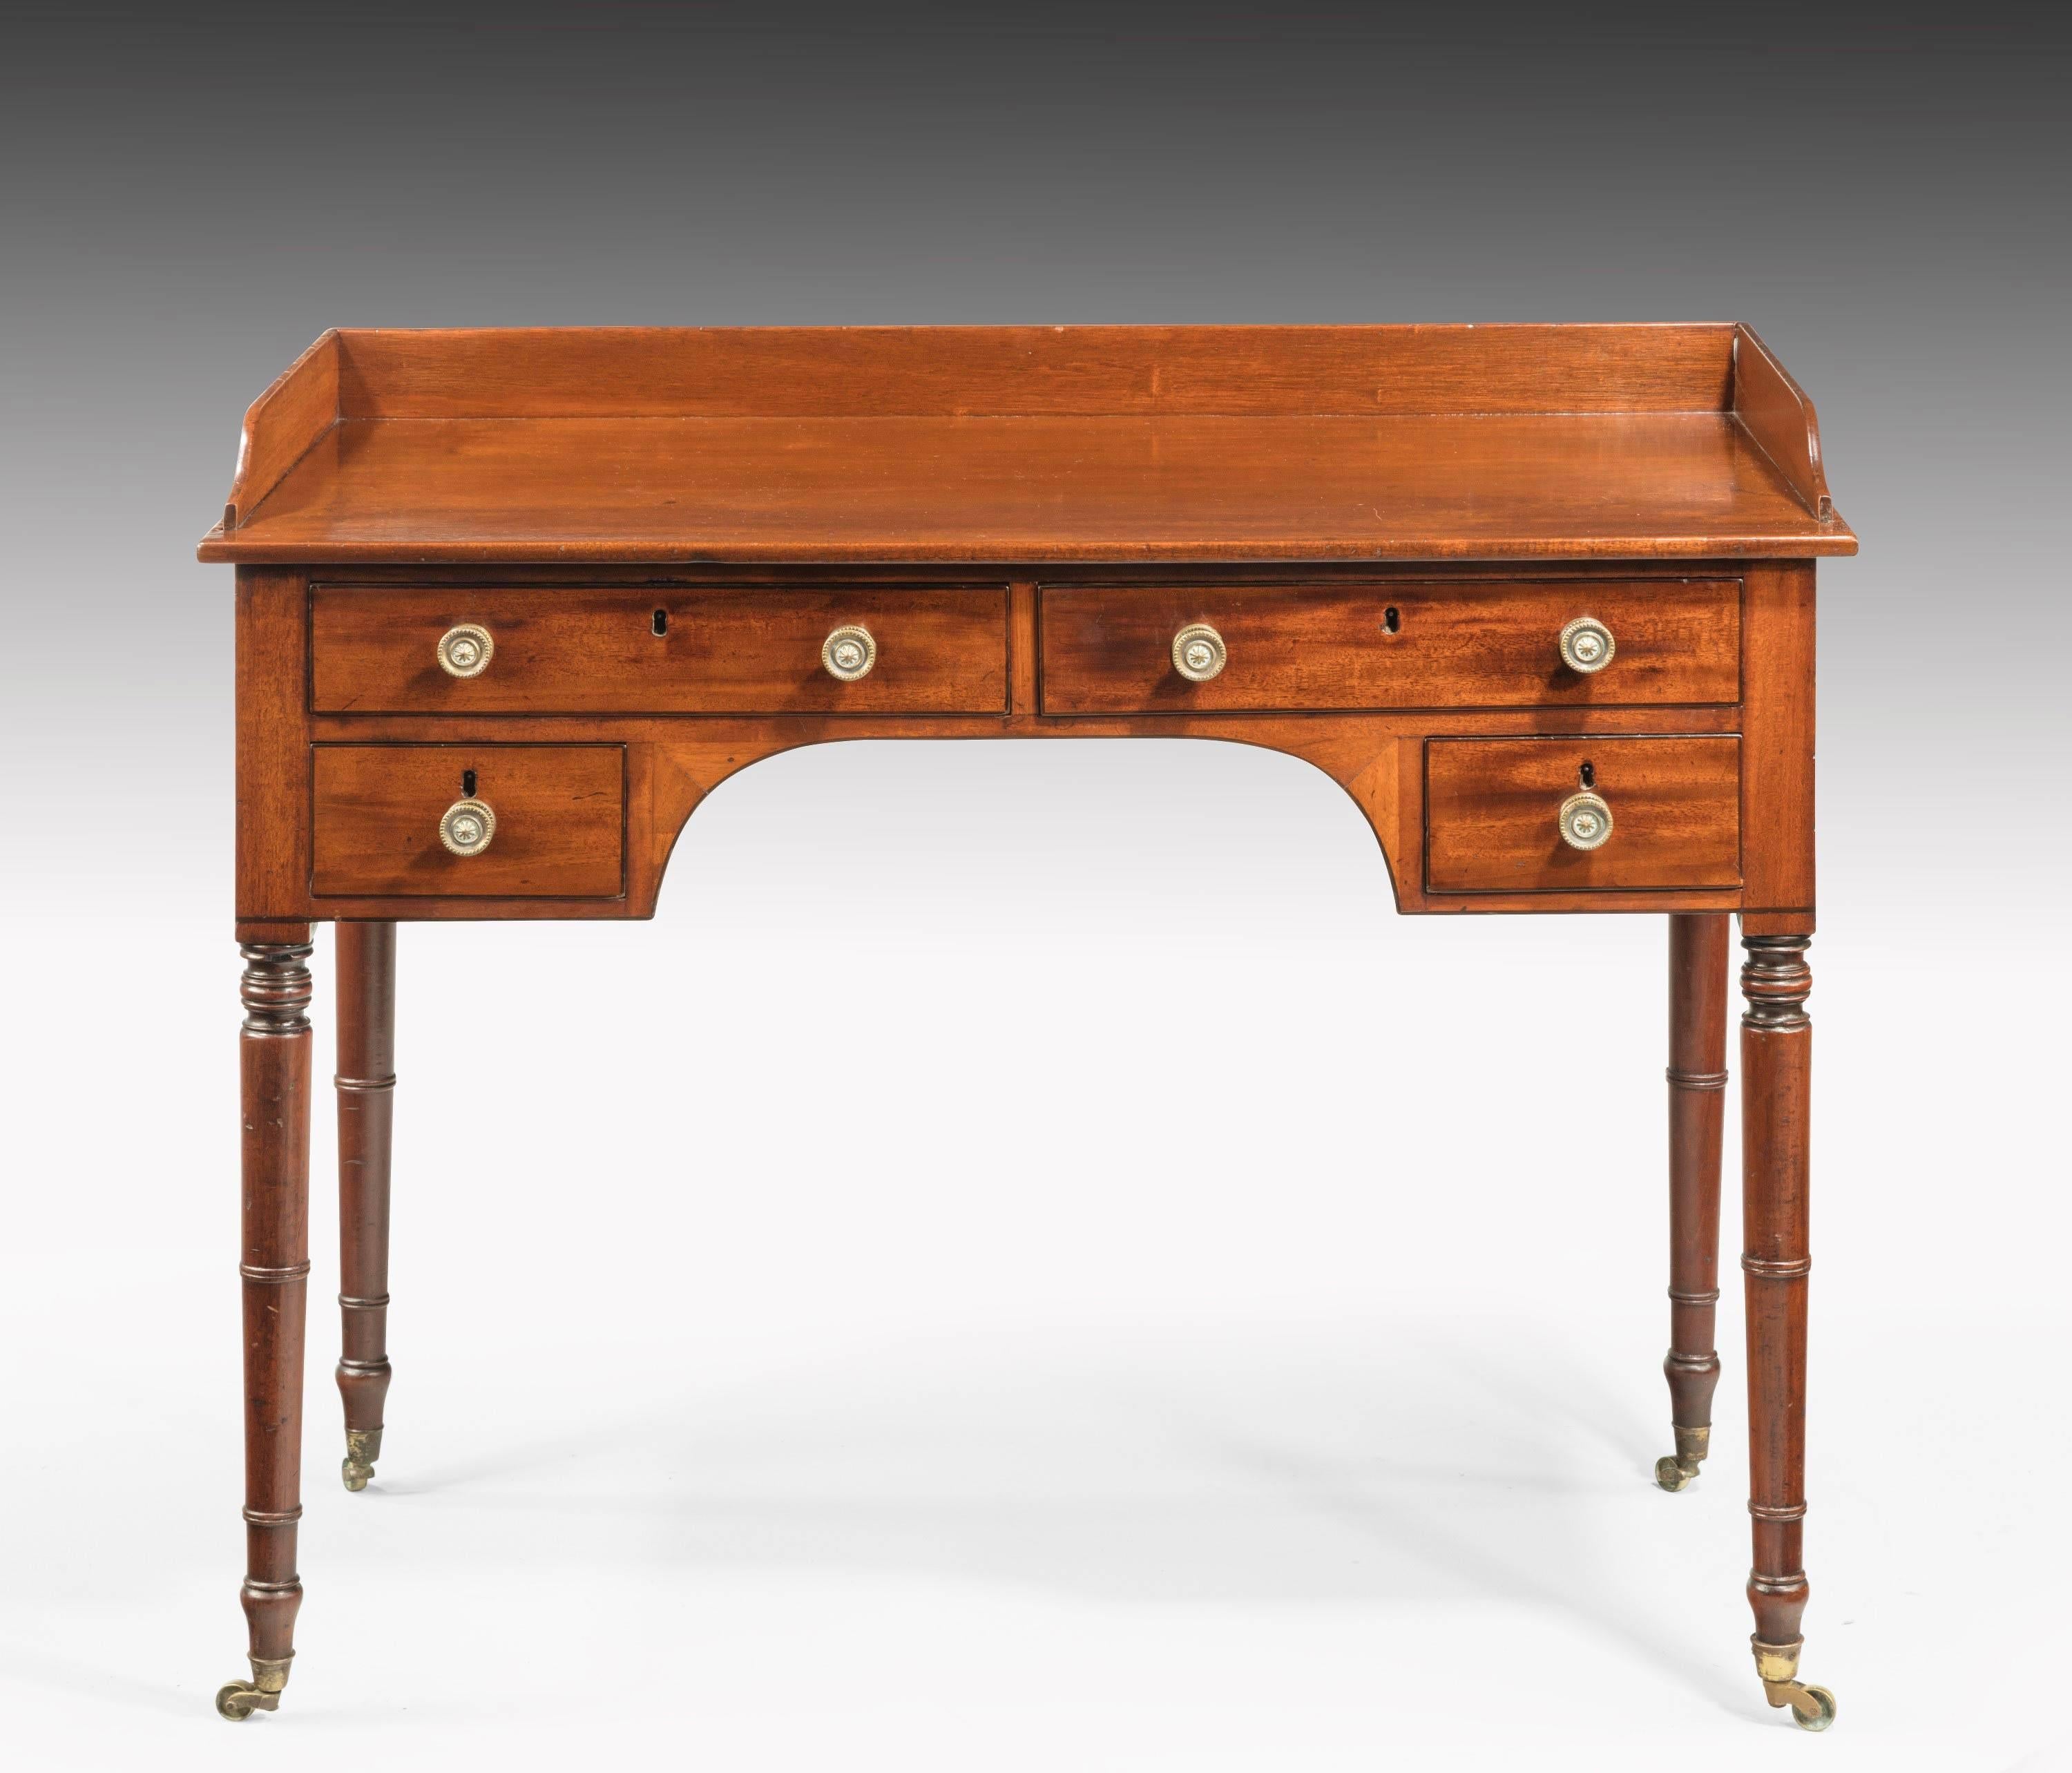 A Regency period mahogany side or writing table very much in the style of Gillows of Lancaster.